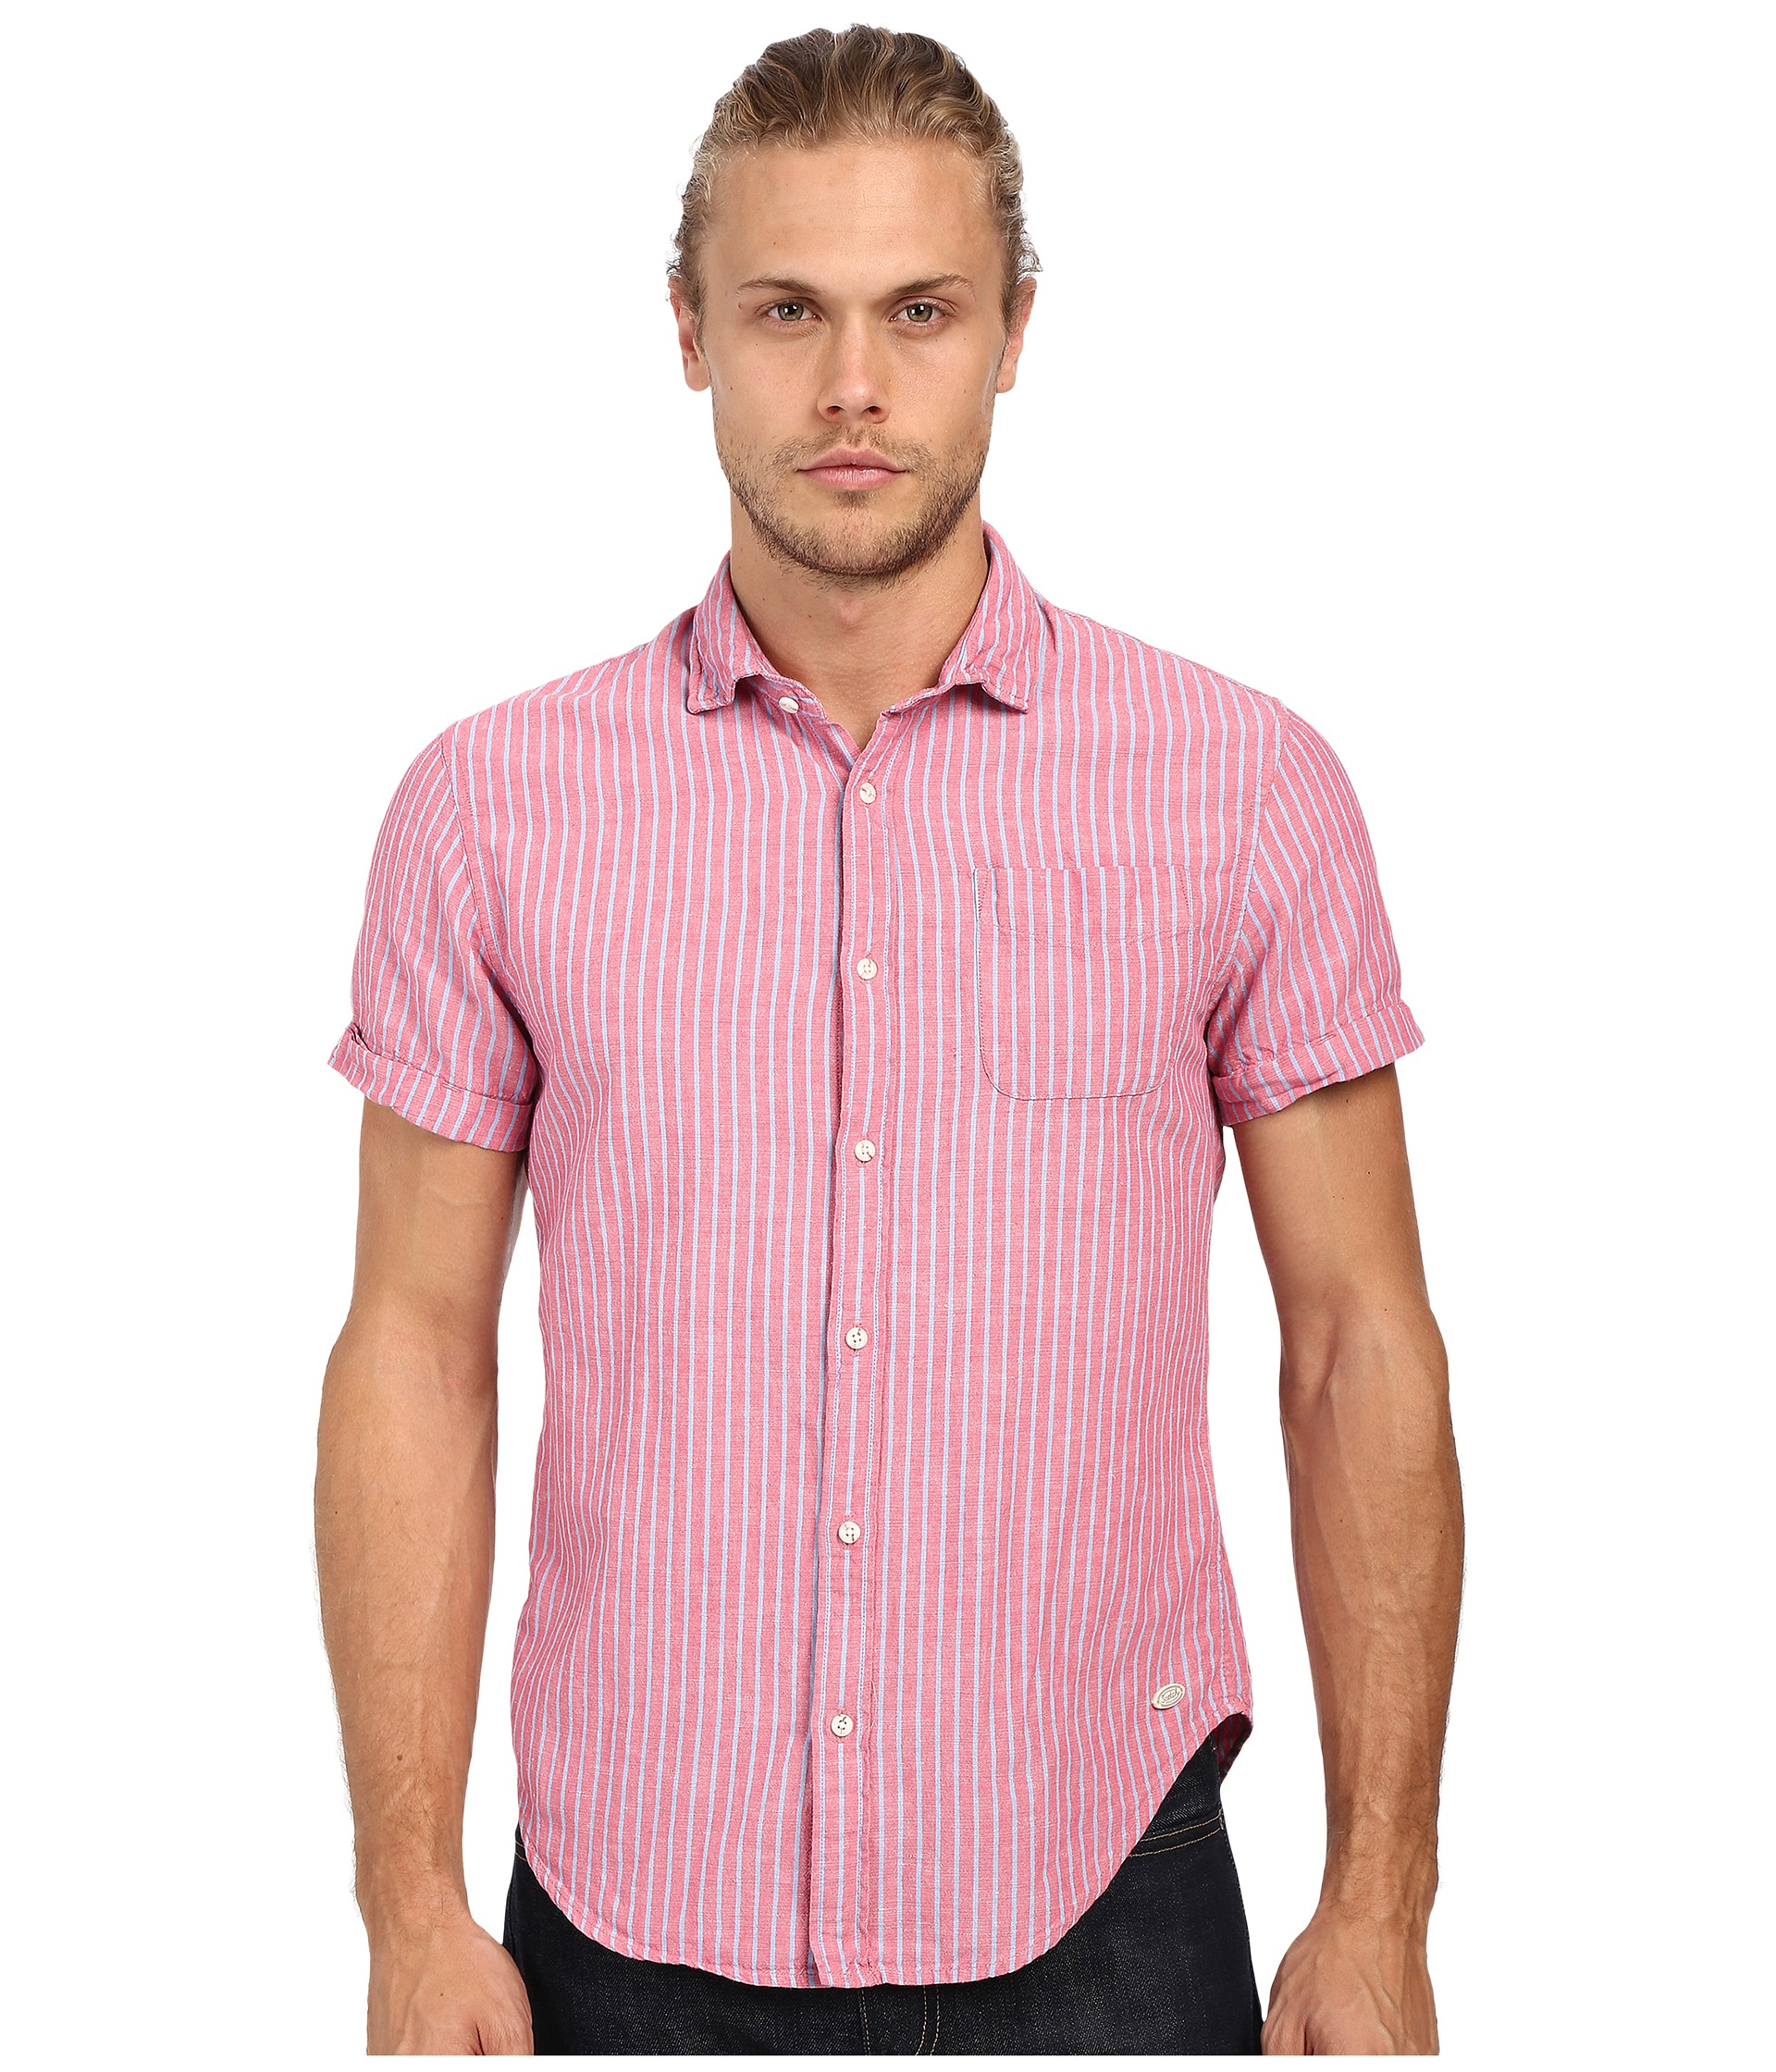 Scotch & Soda Relaxed Short Sleeve Shirt In Crinkled Linen Quality in Pink for Men - Lyst